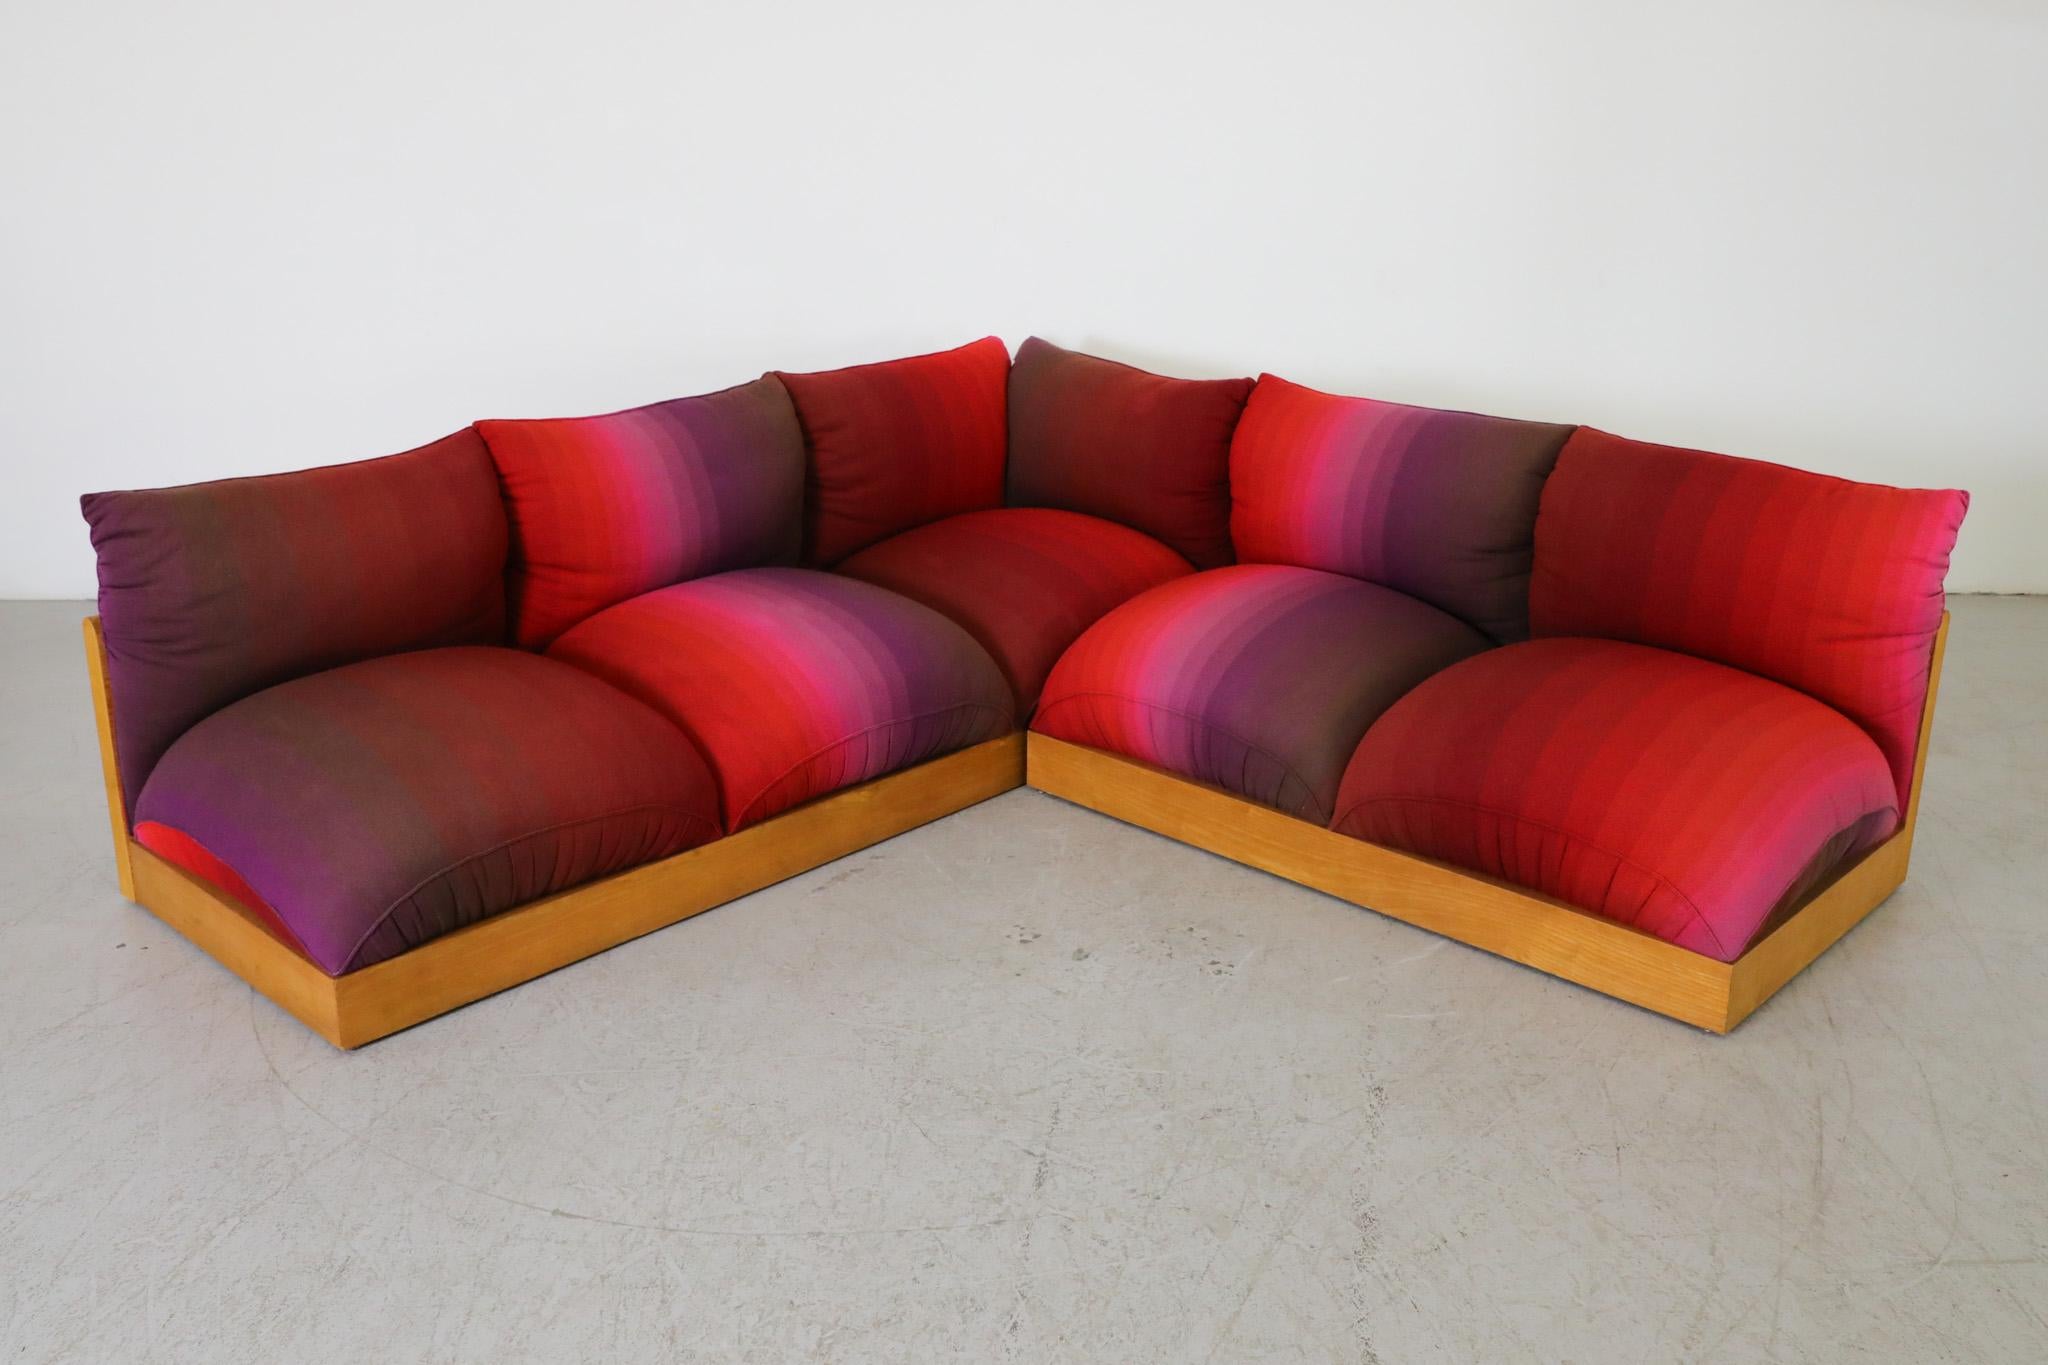 Carlo Bartoli for Rossi di Albizzate sectional sofa, model ‘Down’, 1973 with gorgeous rounded oak frame and spectral striped textile in reds and purples. This stunning sofa has two sections, a 2 seater with no arms and a 3 seater with right arm. Can